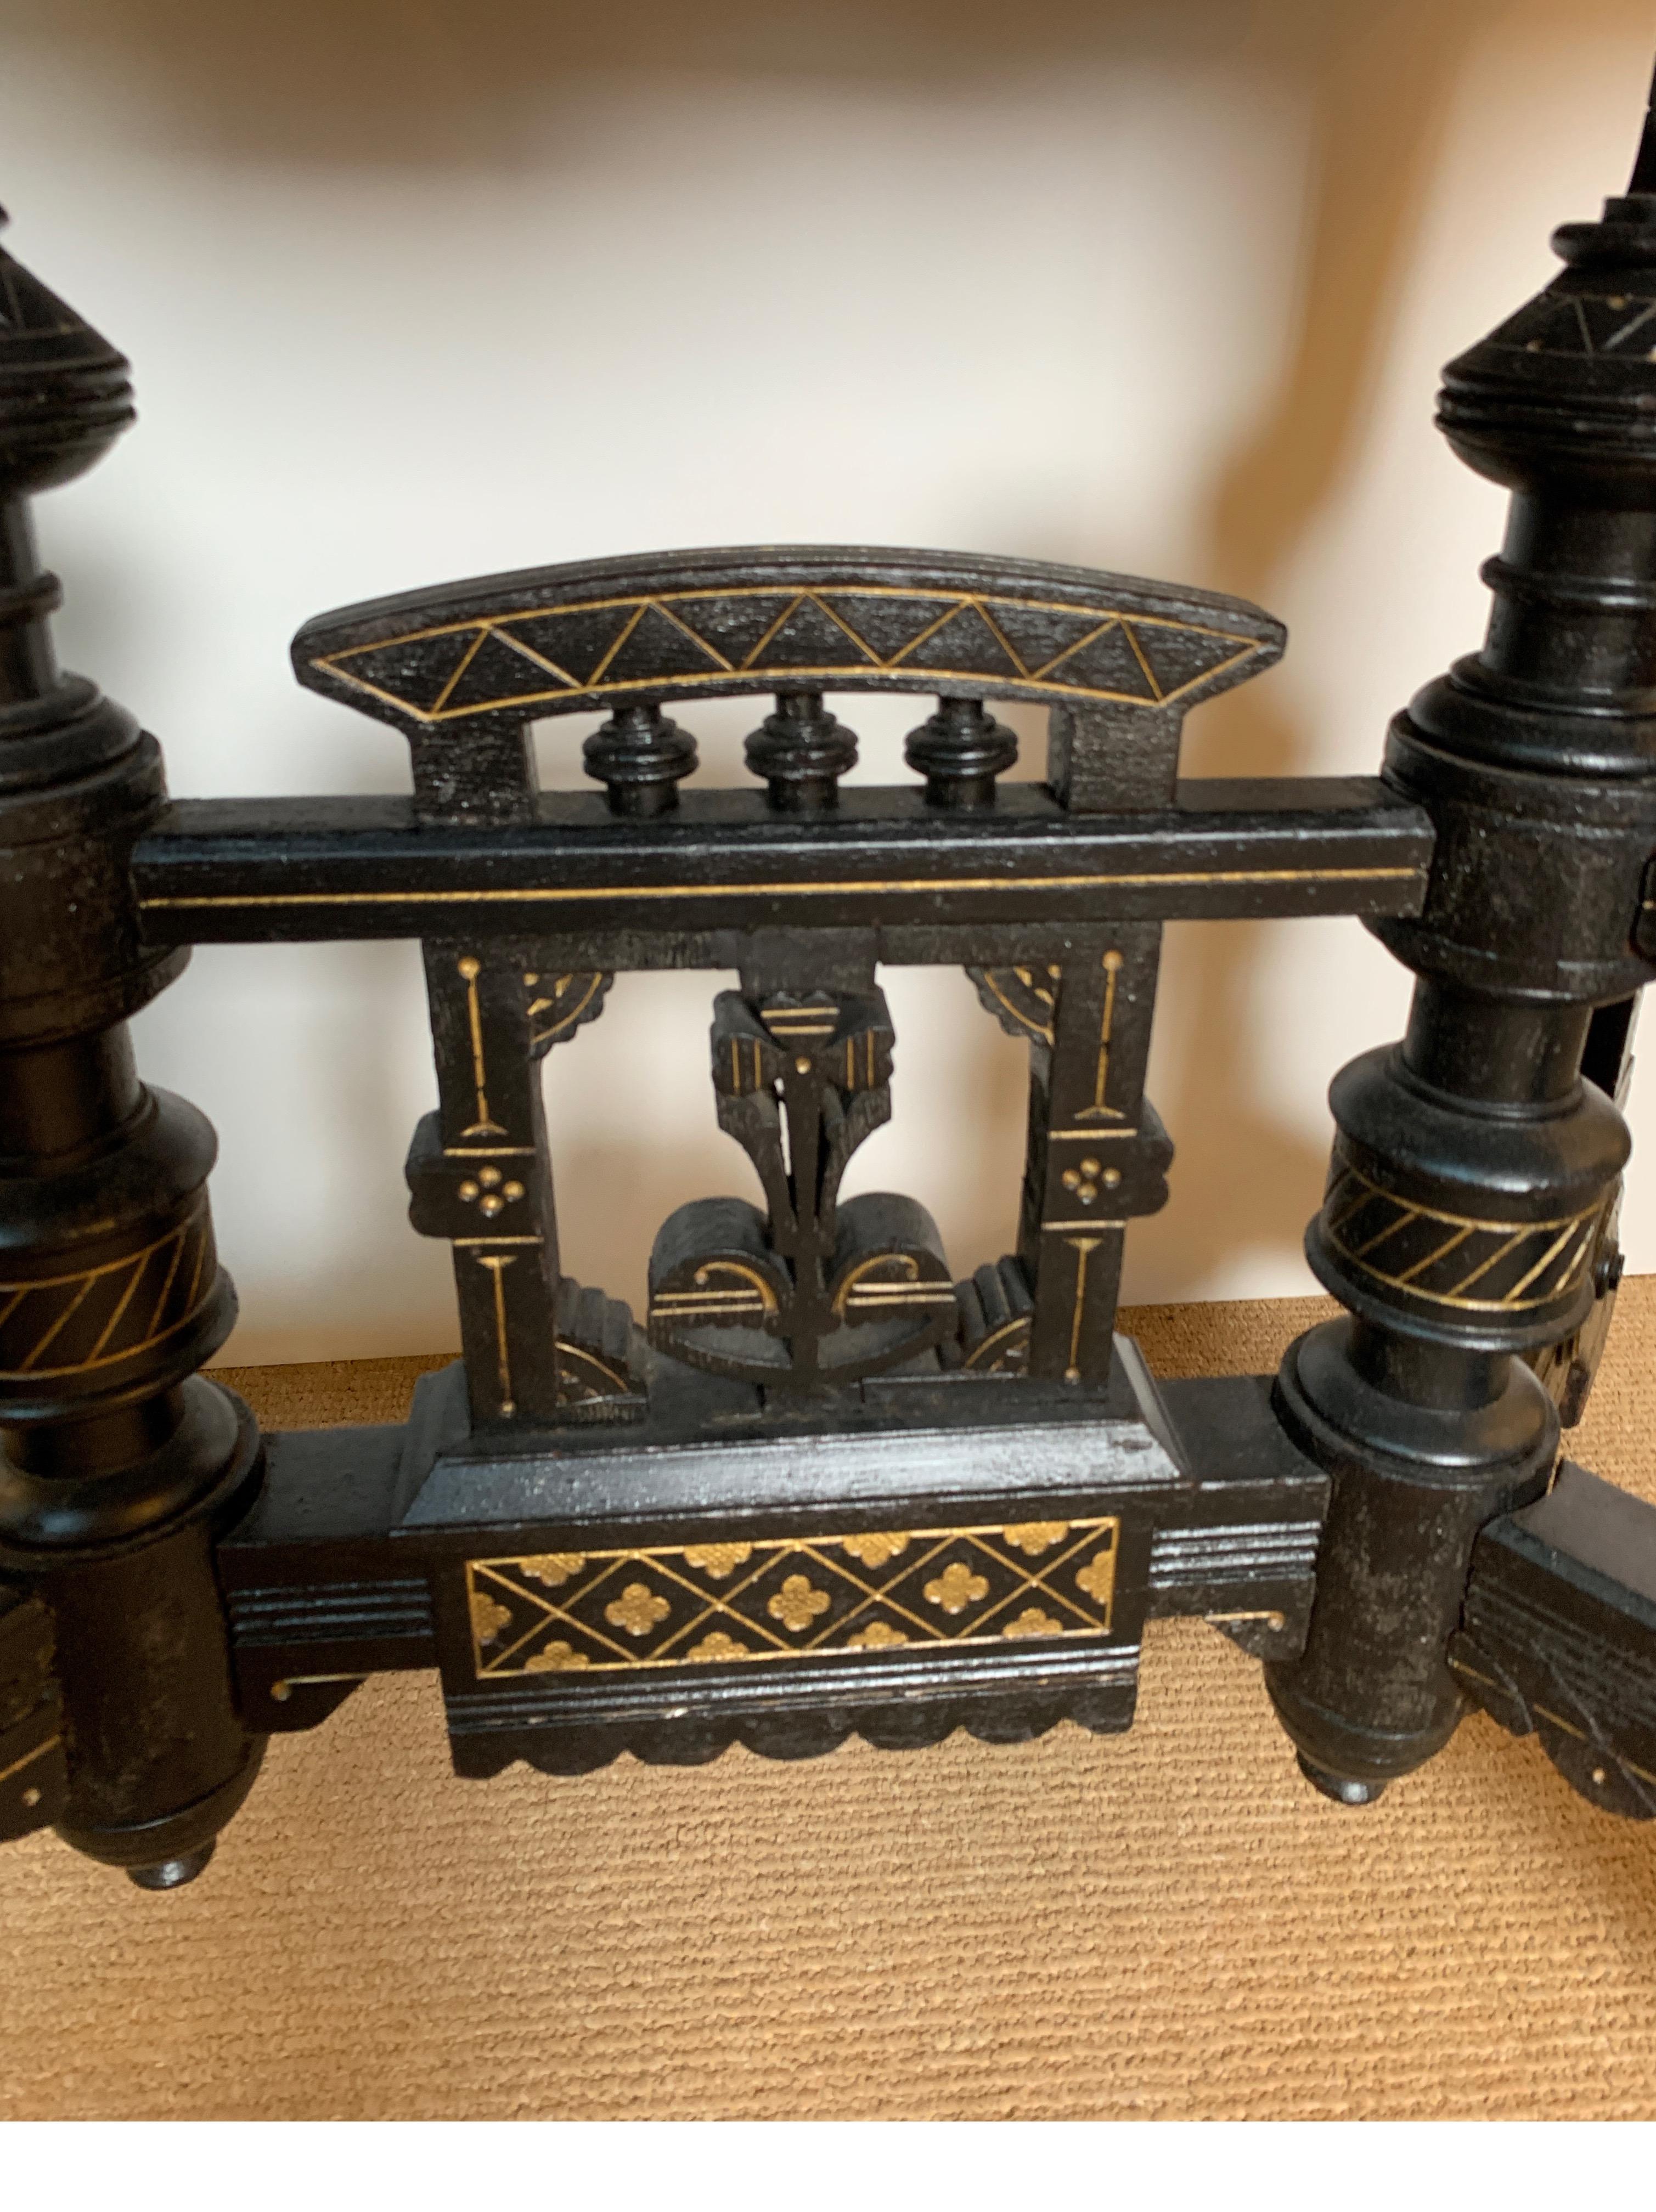 Eastlake Aesthetic parlor table, ebonized with gold decoration and with a rare pick 